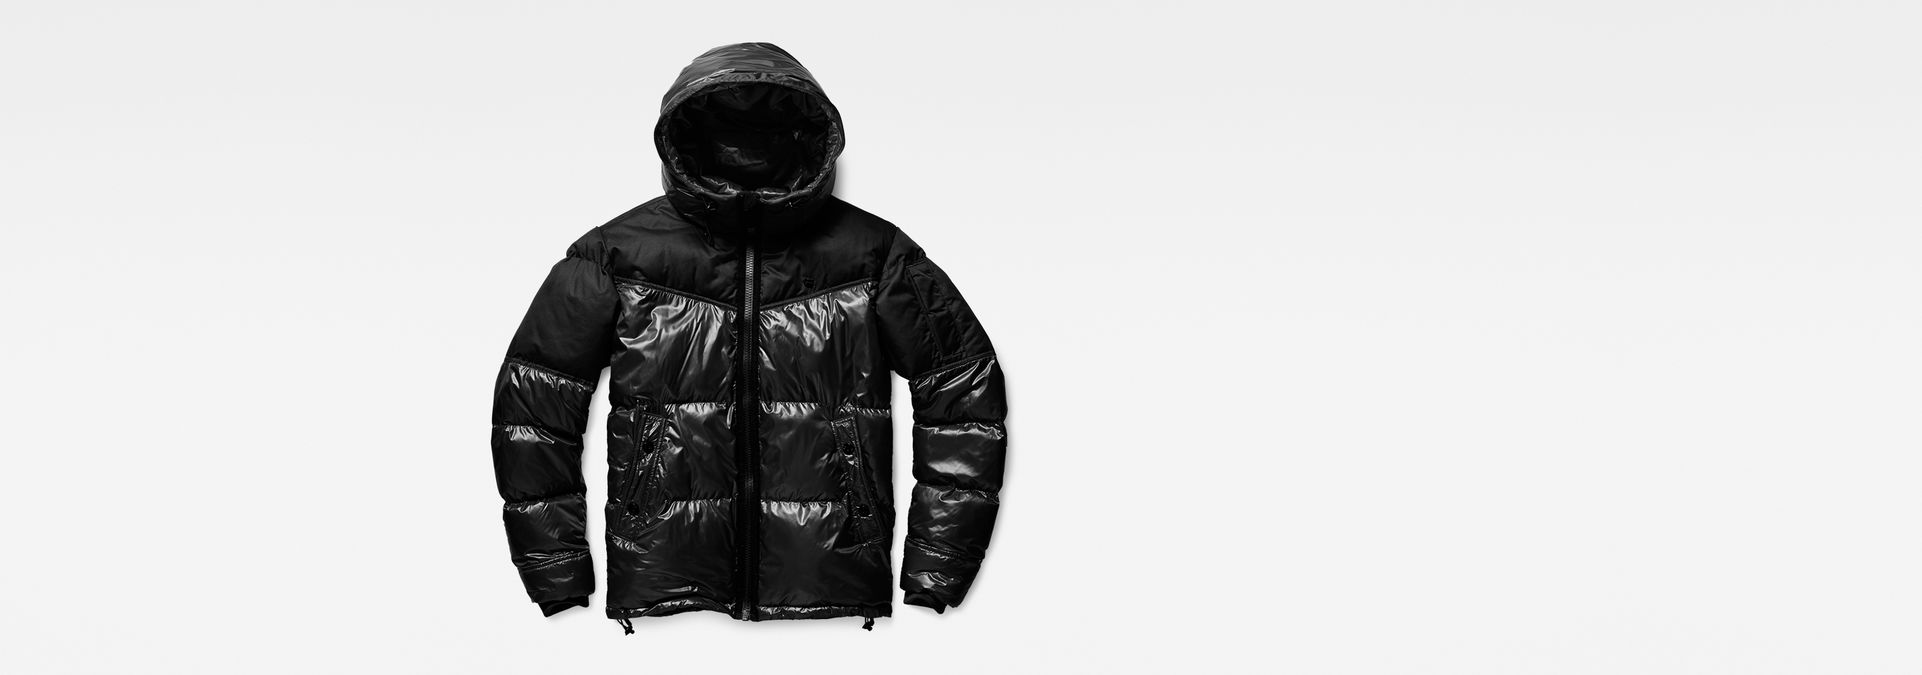 whistler hooded quilted jacket g star